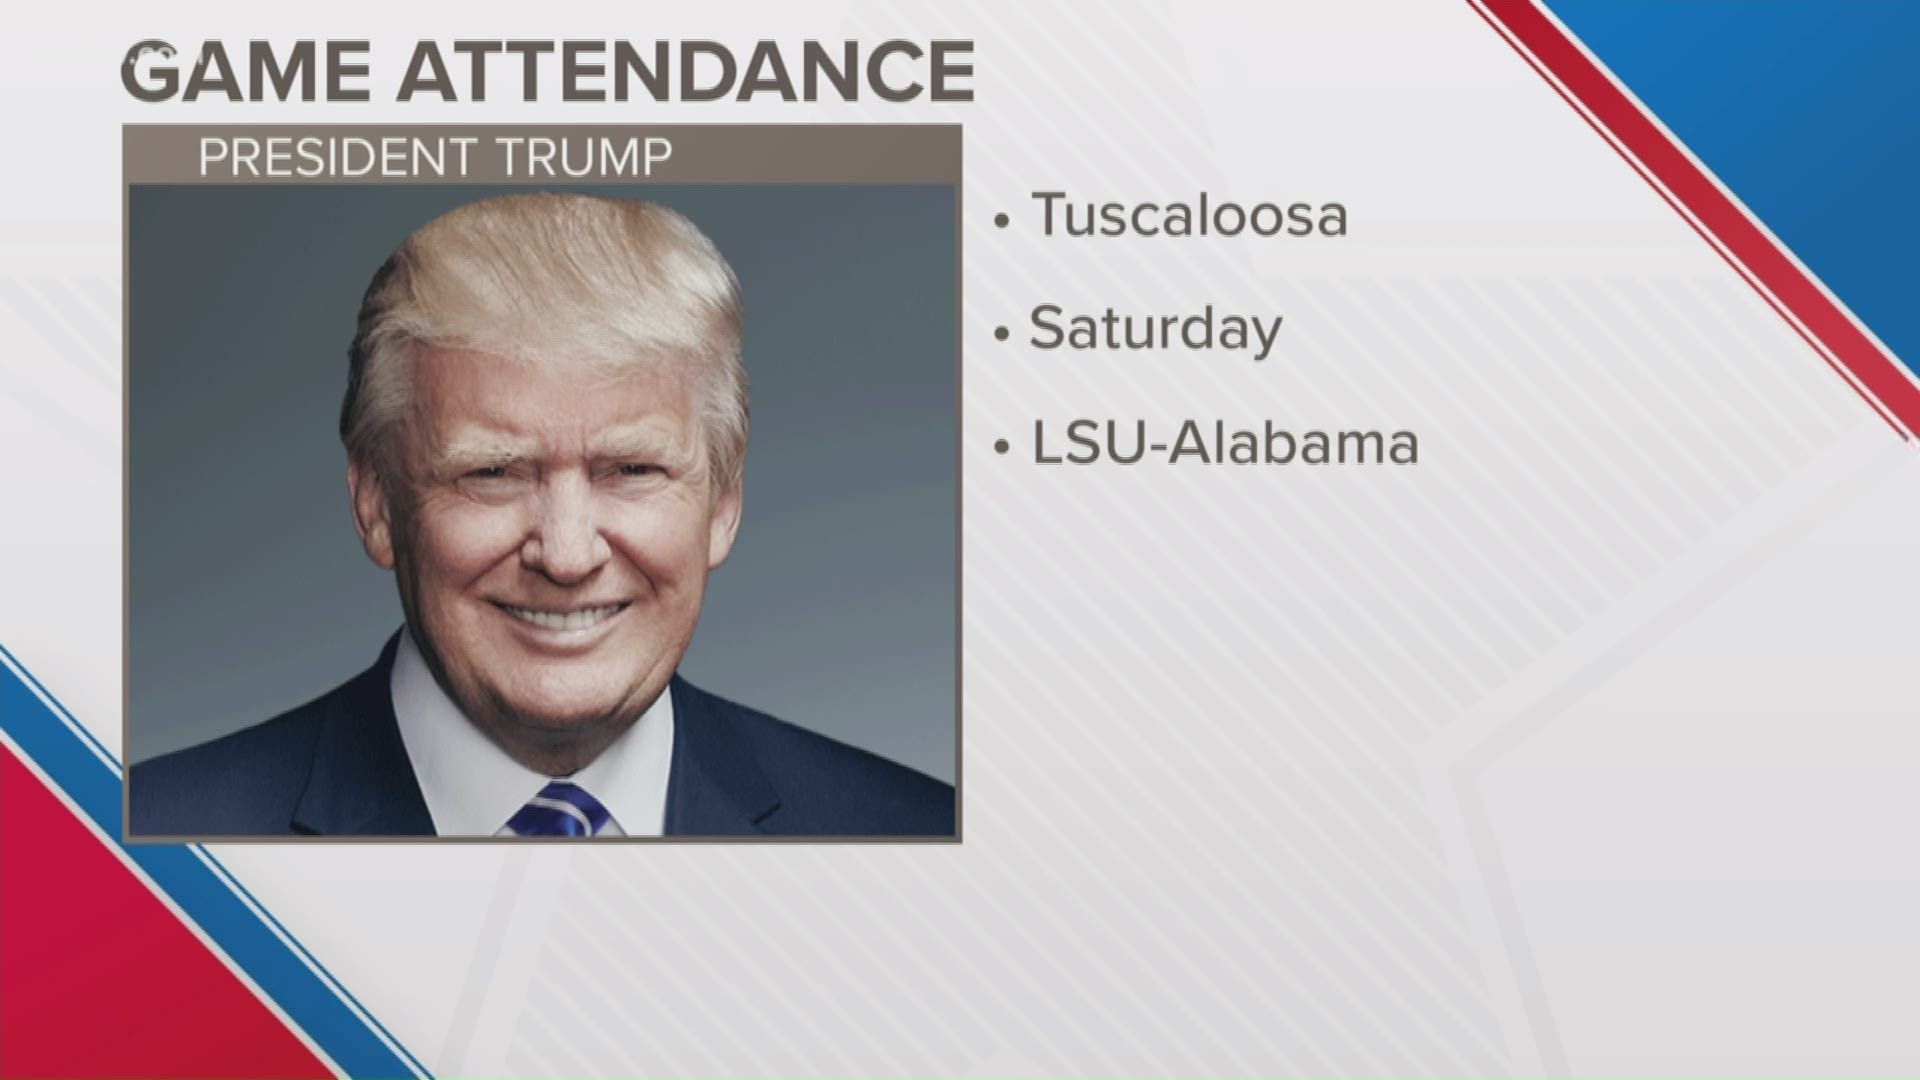 Trump attended the National Championship Game between Alabama and Georgia in 2017.